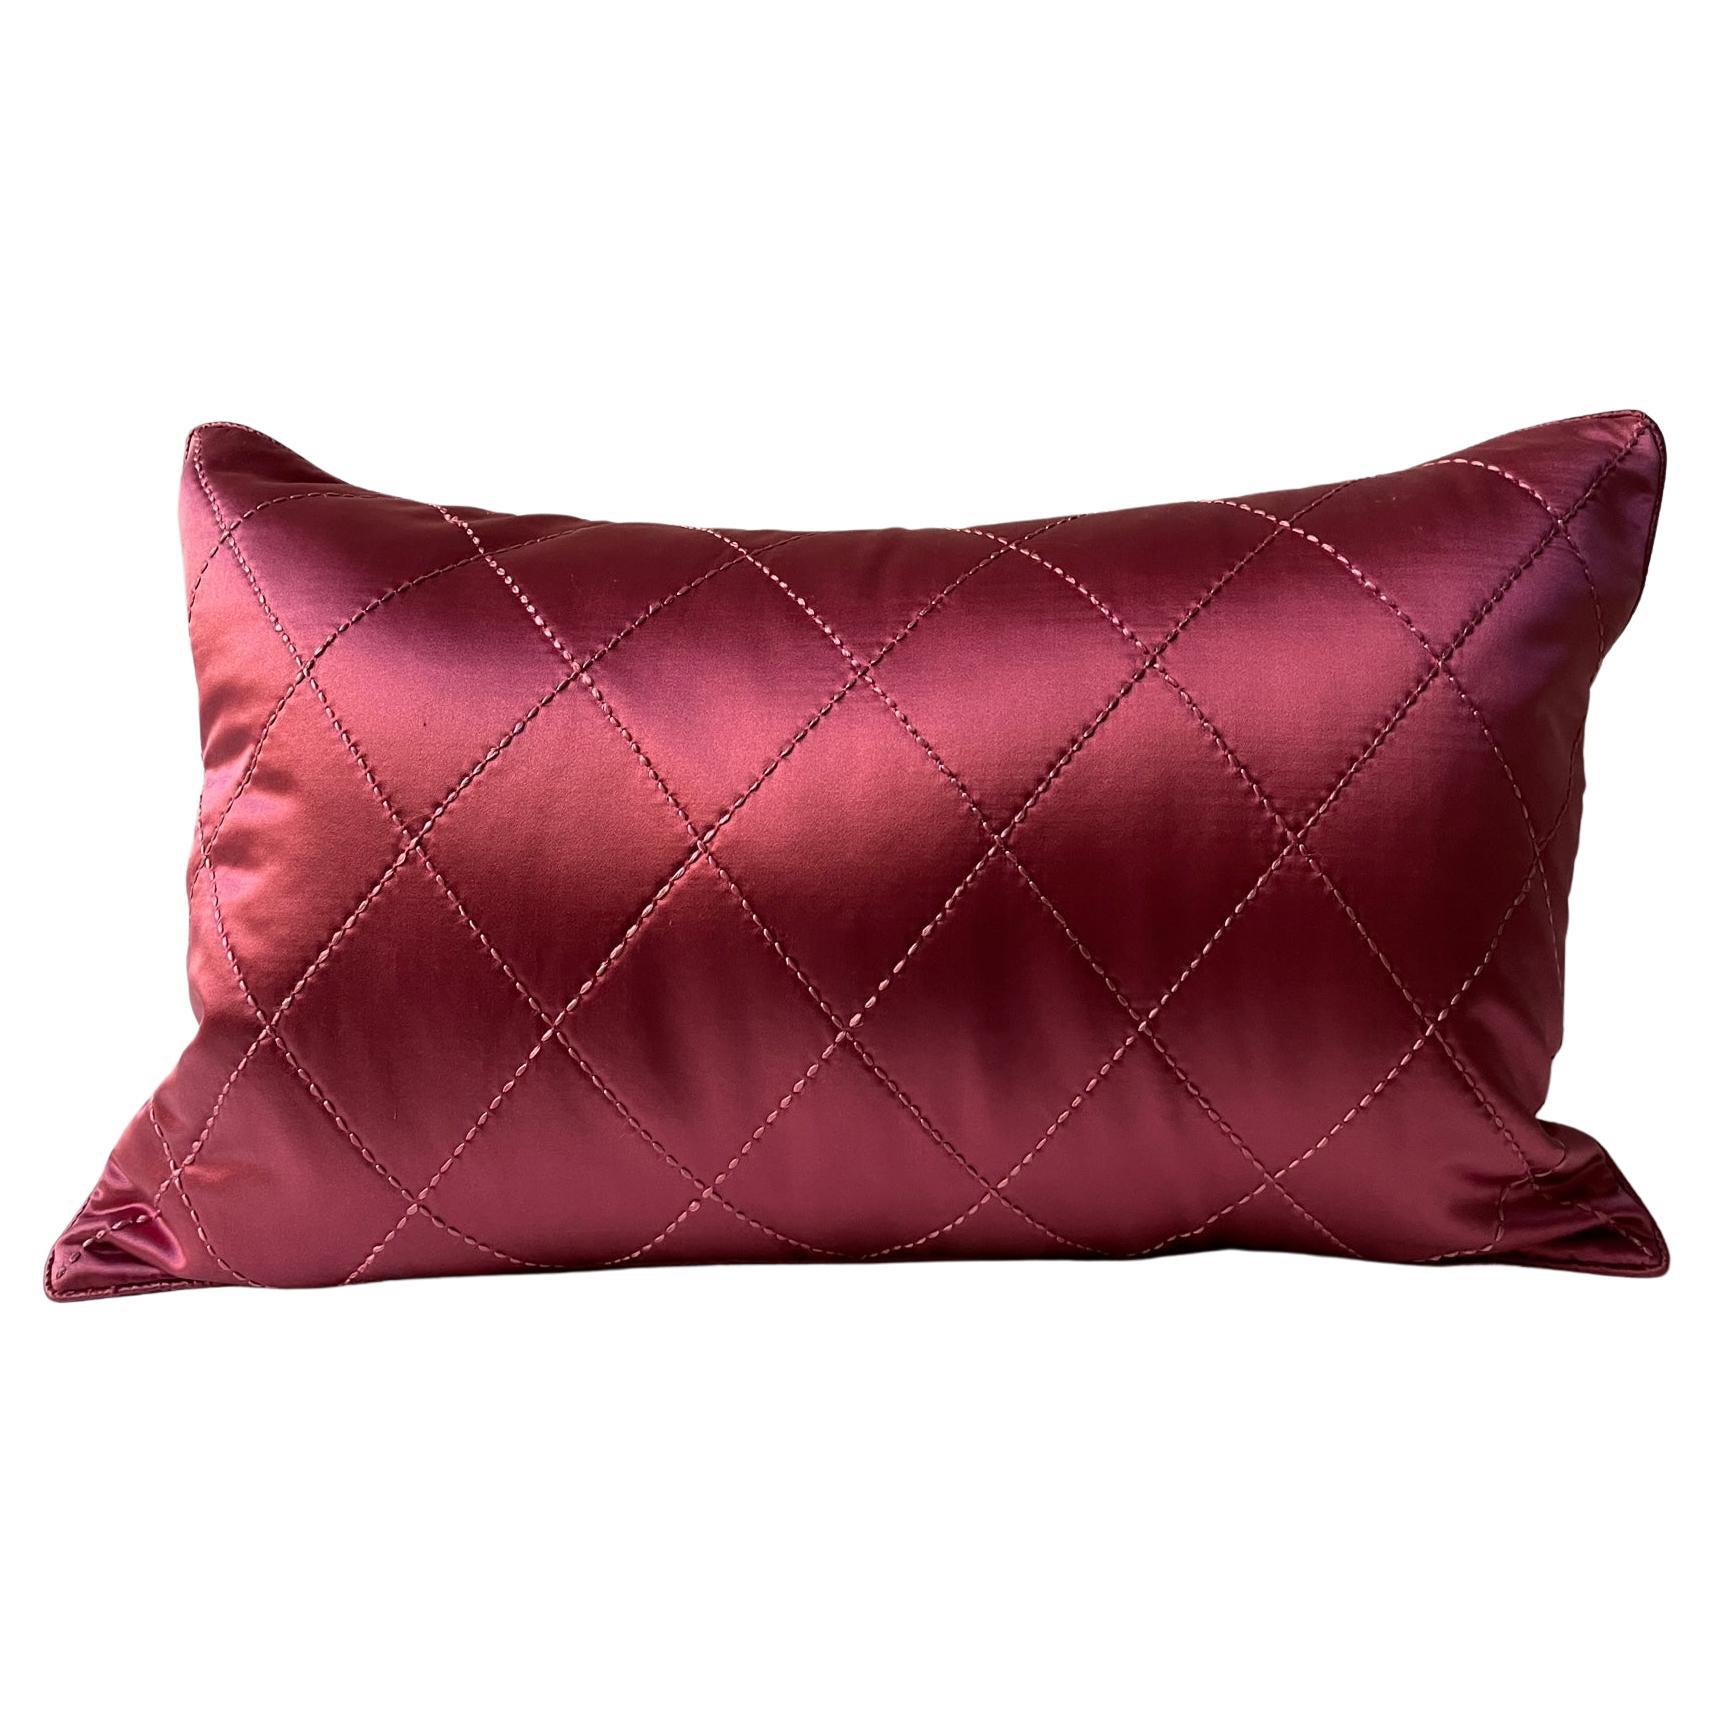 Cushion Cover Hand Quilted Rhombus Pattern in Silk Satin Strawberry Red